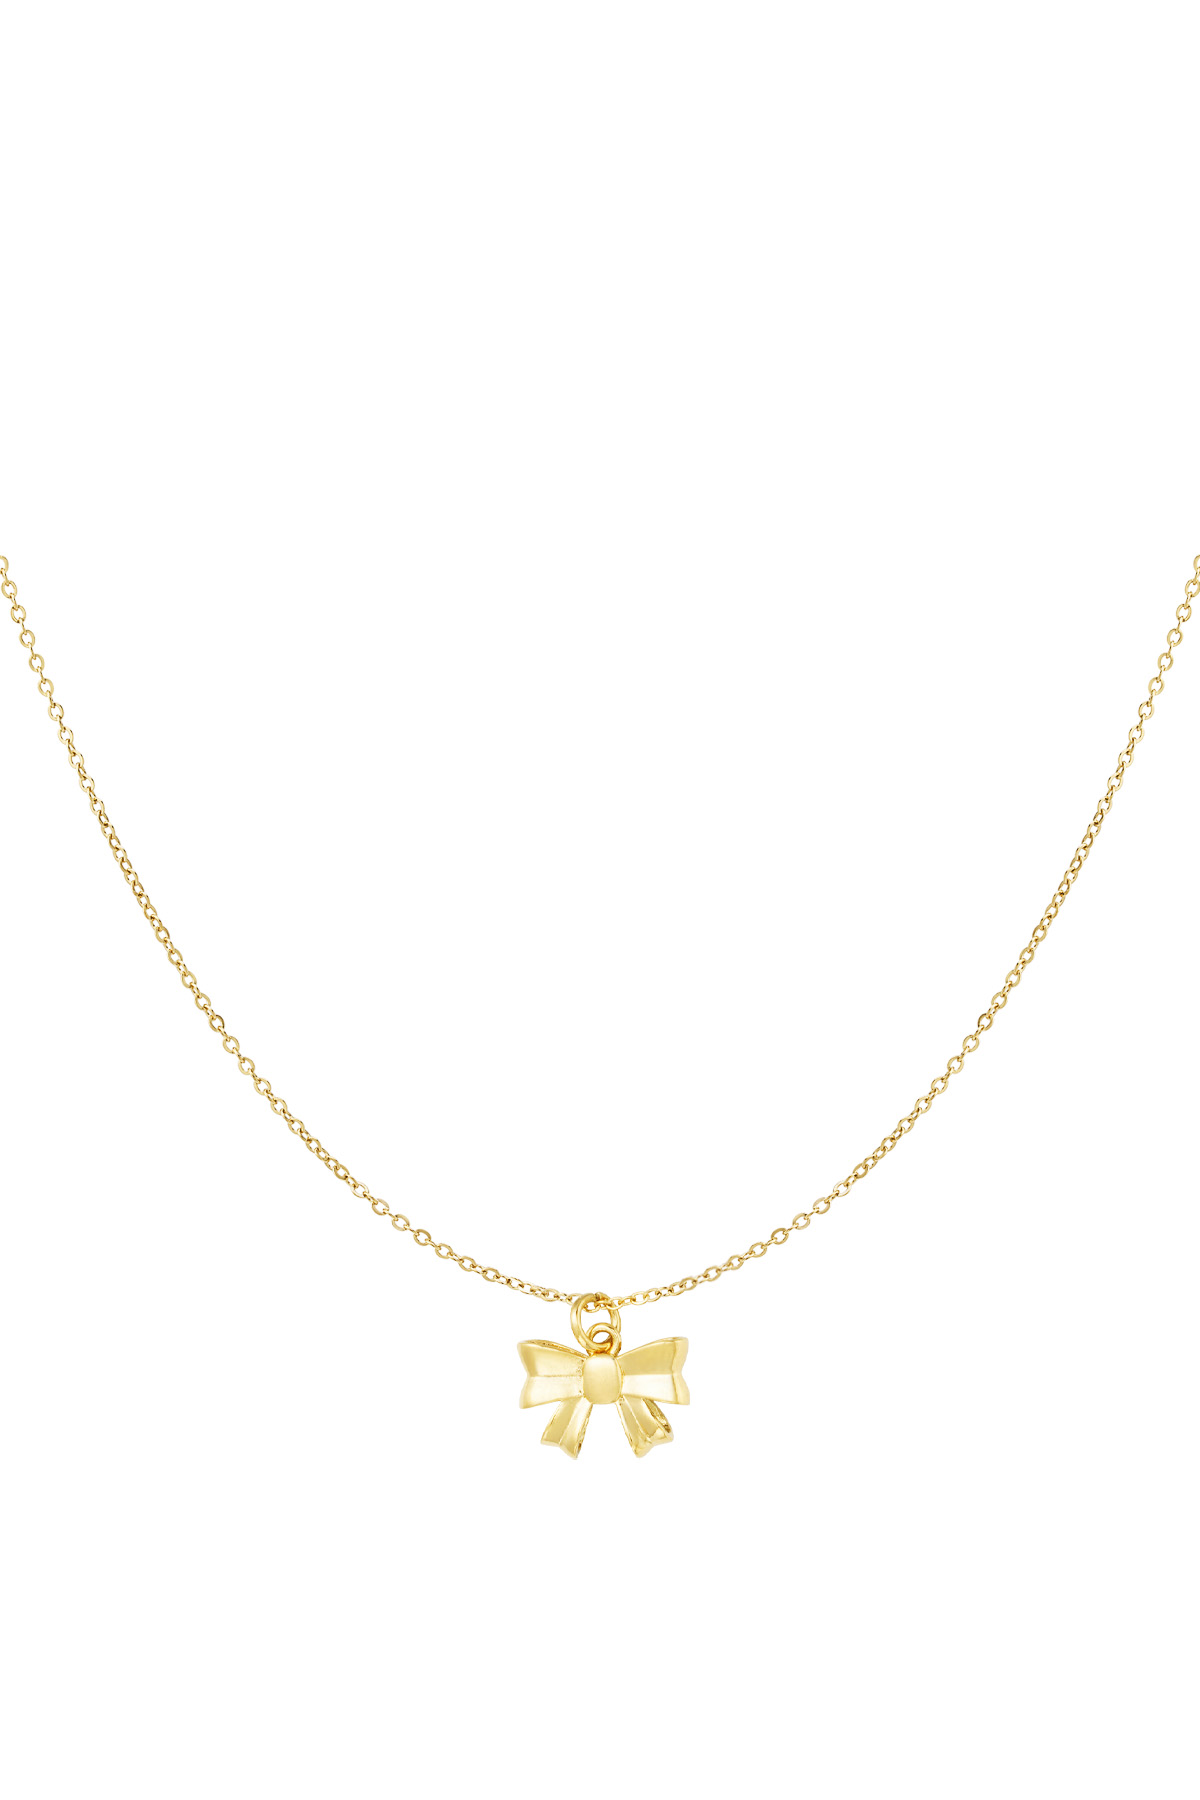 Simple necklace with bow pendant - Gold